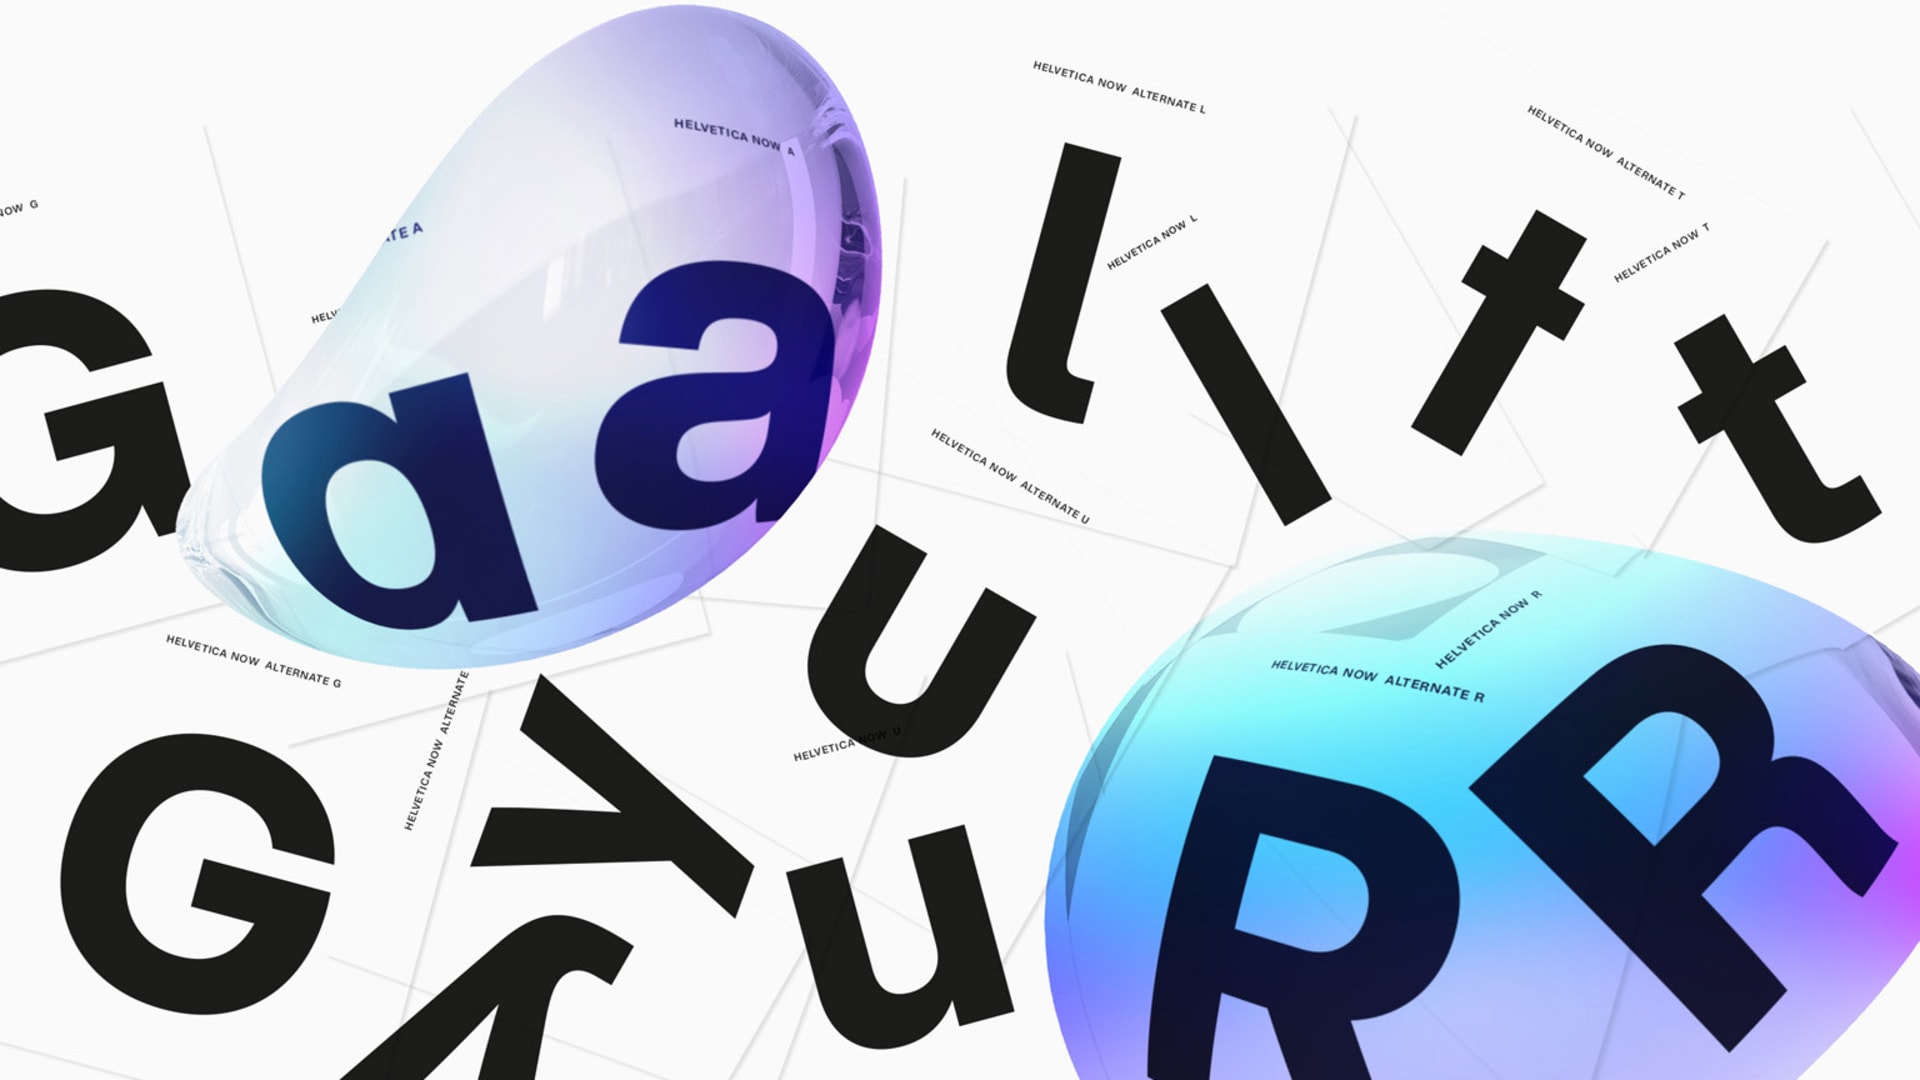 Helvetica, the world’s most famous typeface, gets a makeover